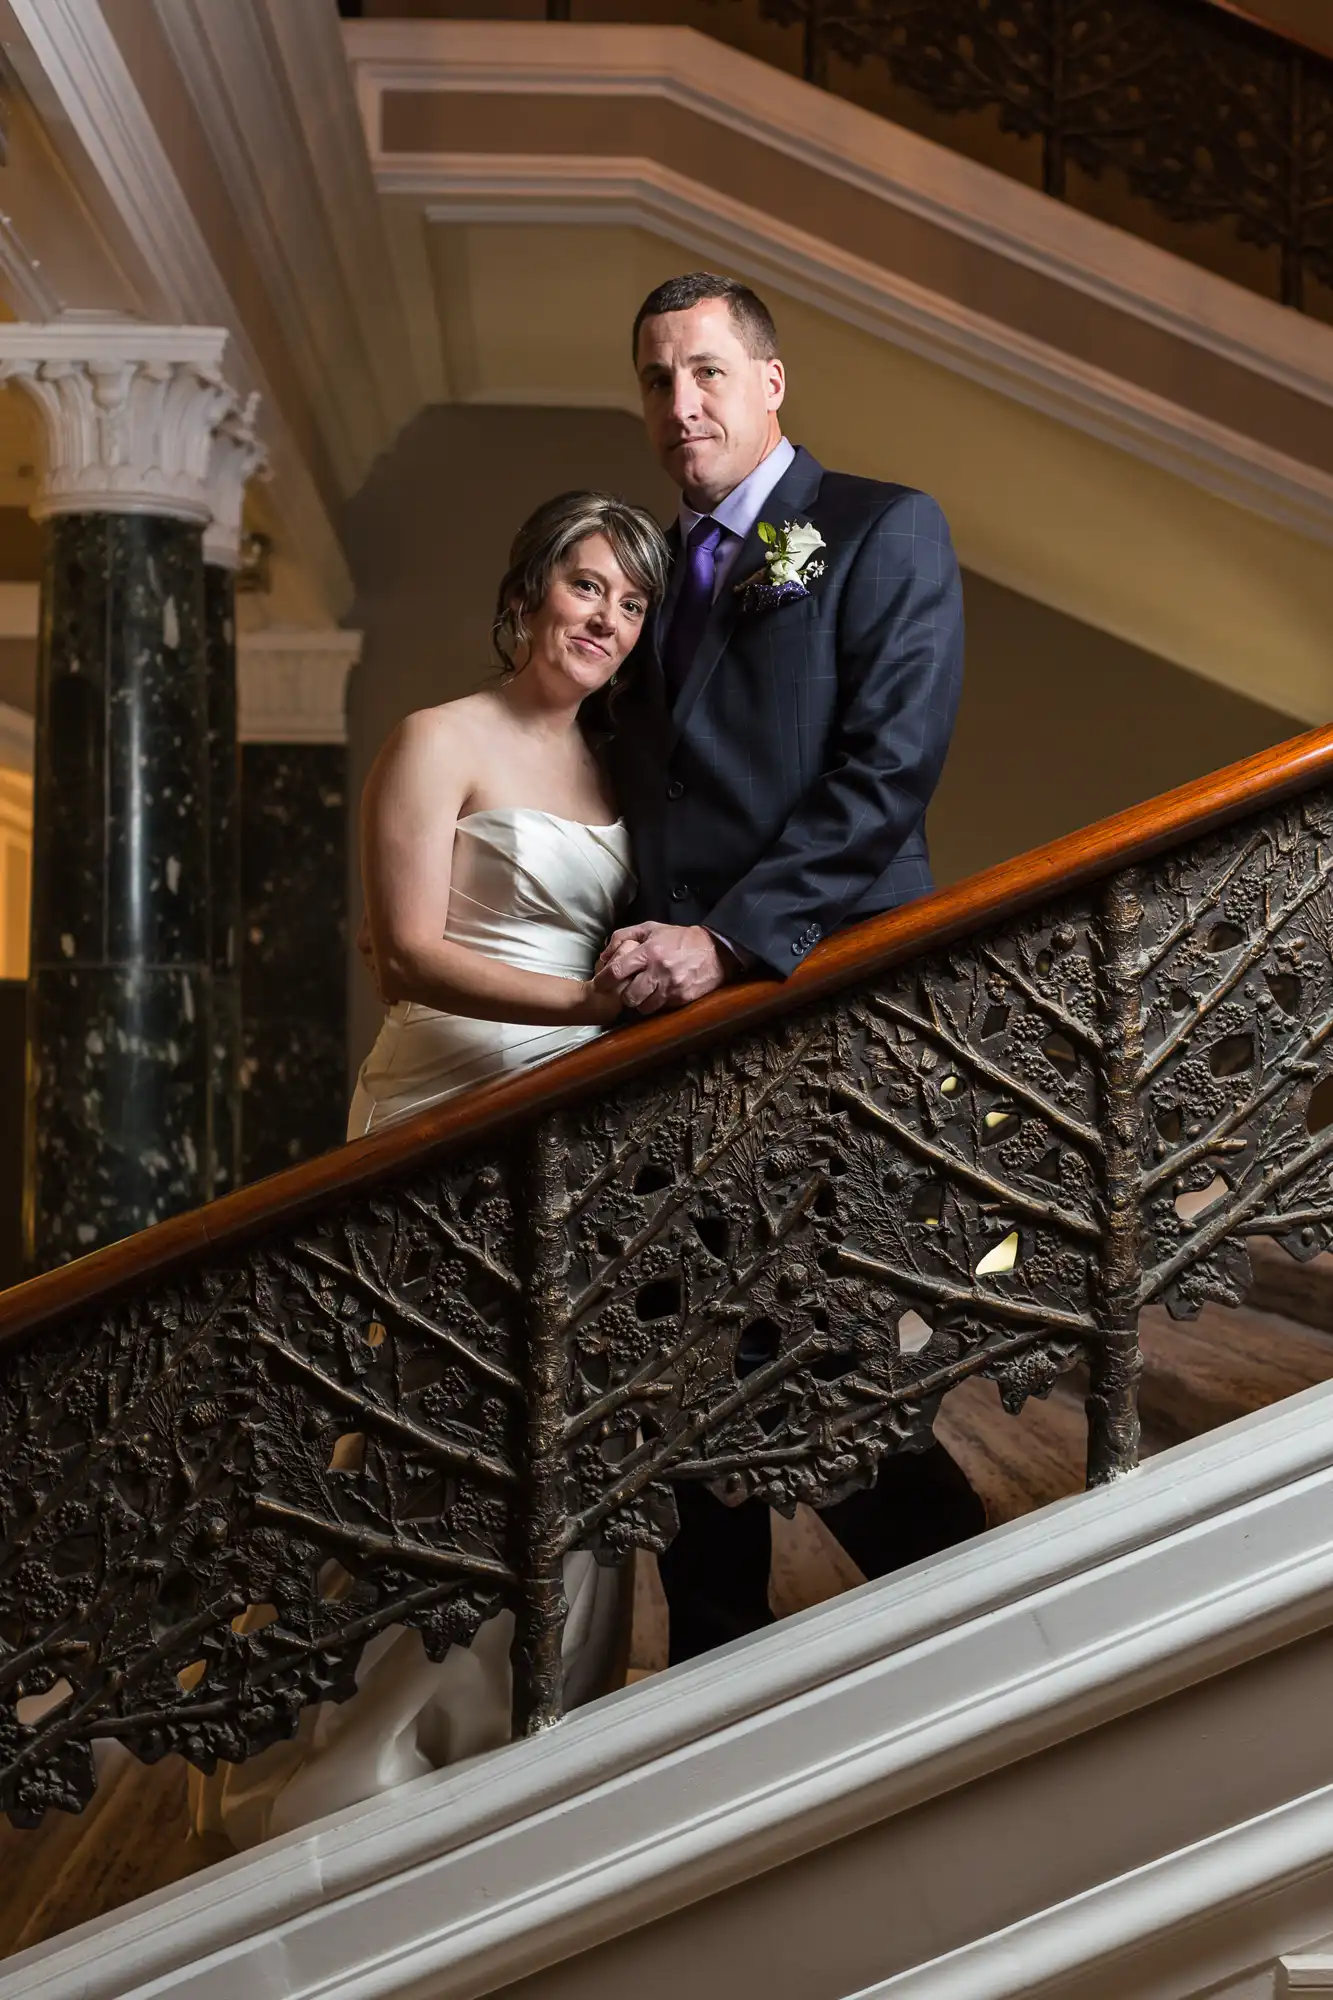 A bride and groom posing together on an ornate staircase.